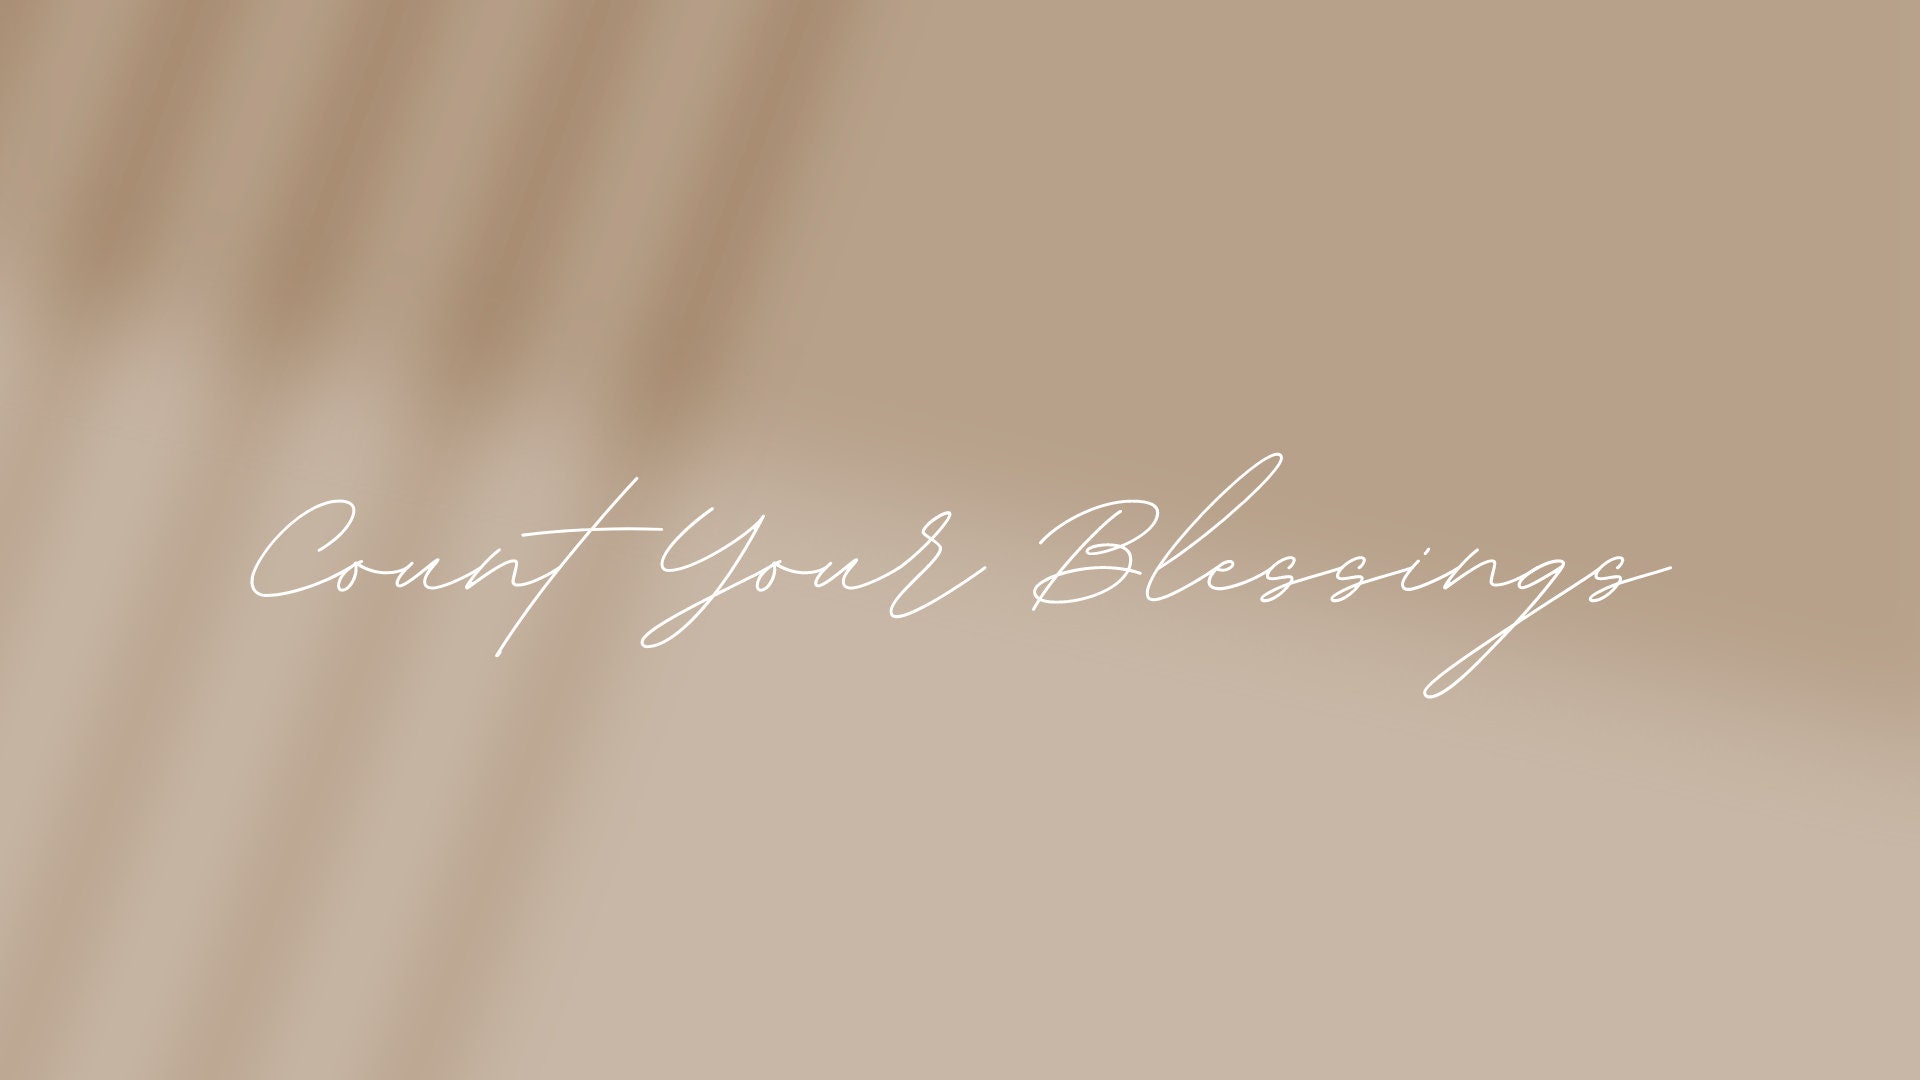 BMTH Count Your Blessings Wallpaper by JuanMXGalarza on DeviantArt